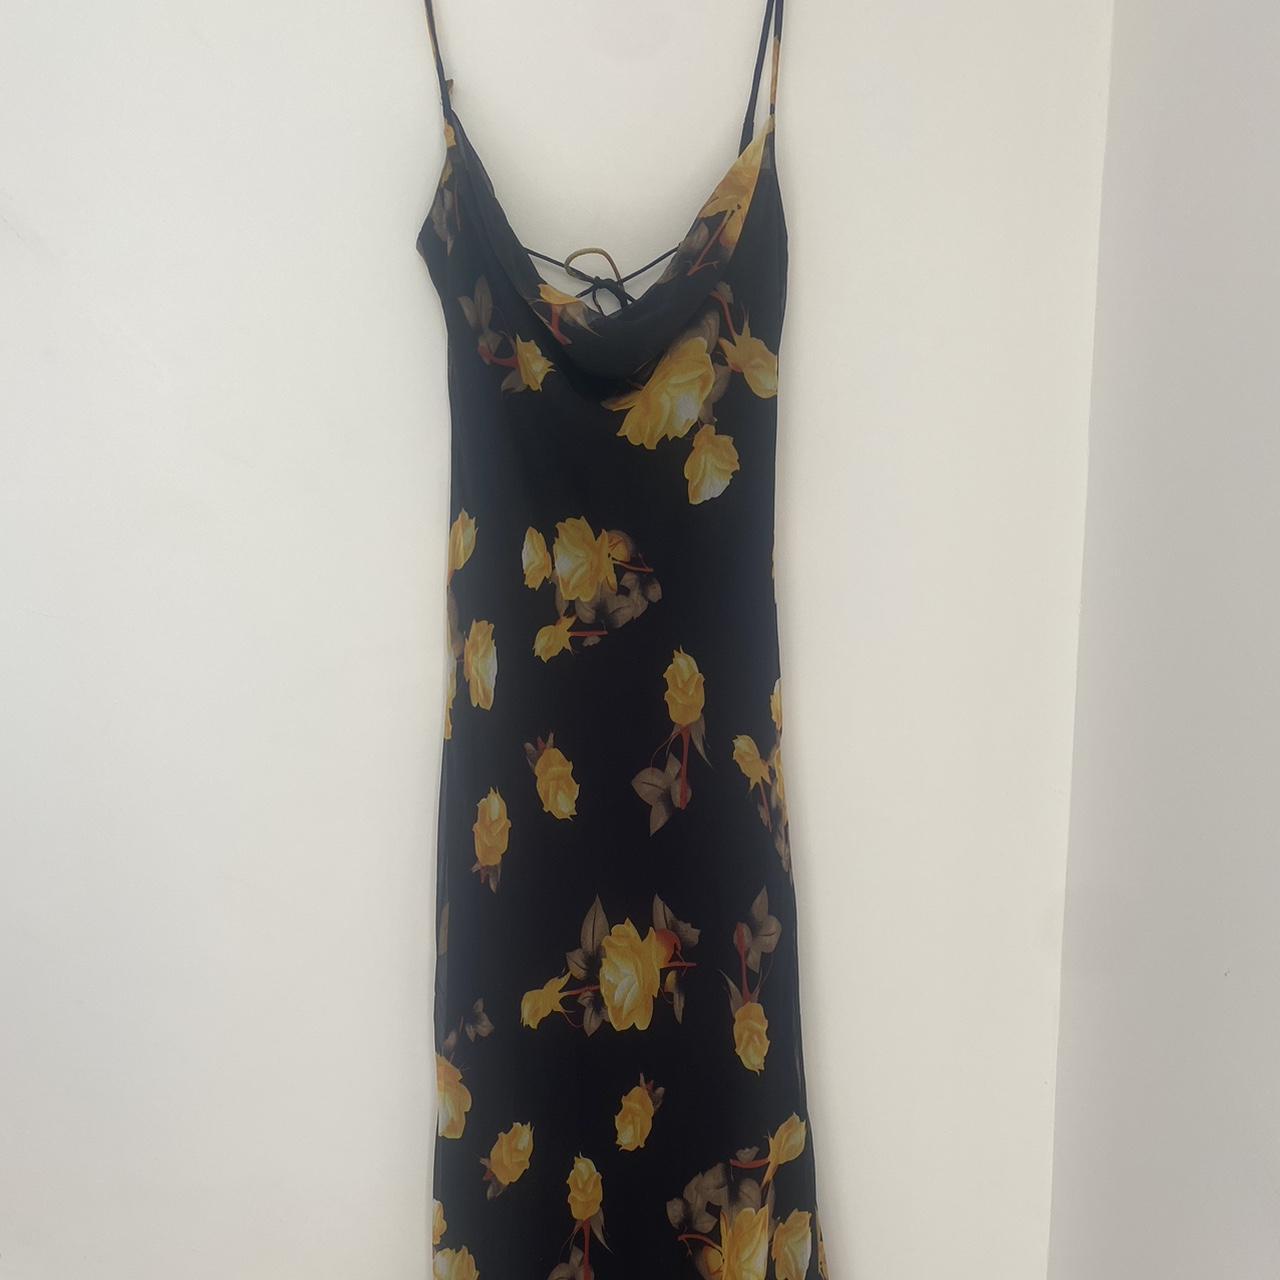 Valenica Black And Yellow Floral Cowl Maxi... - Depop